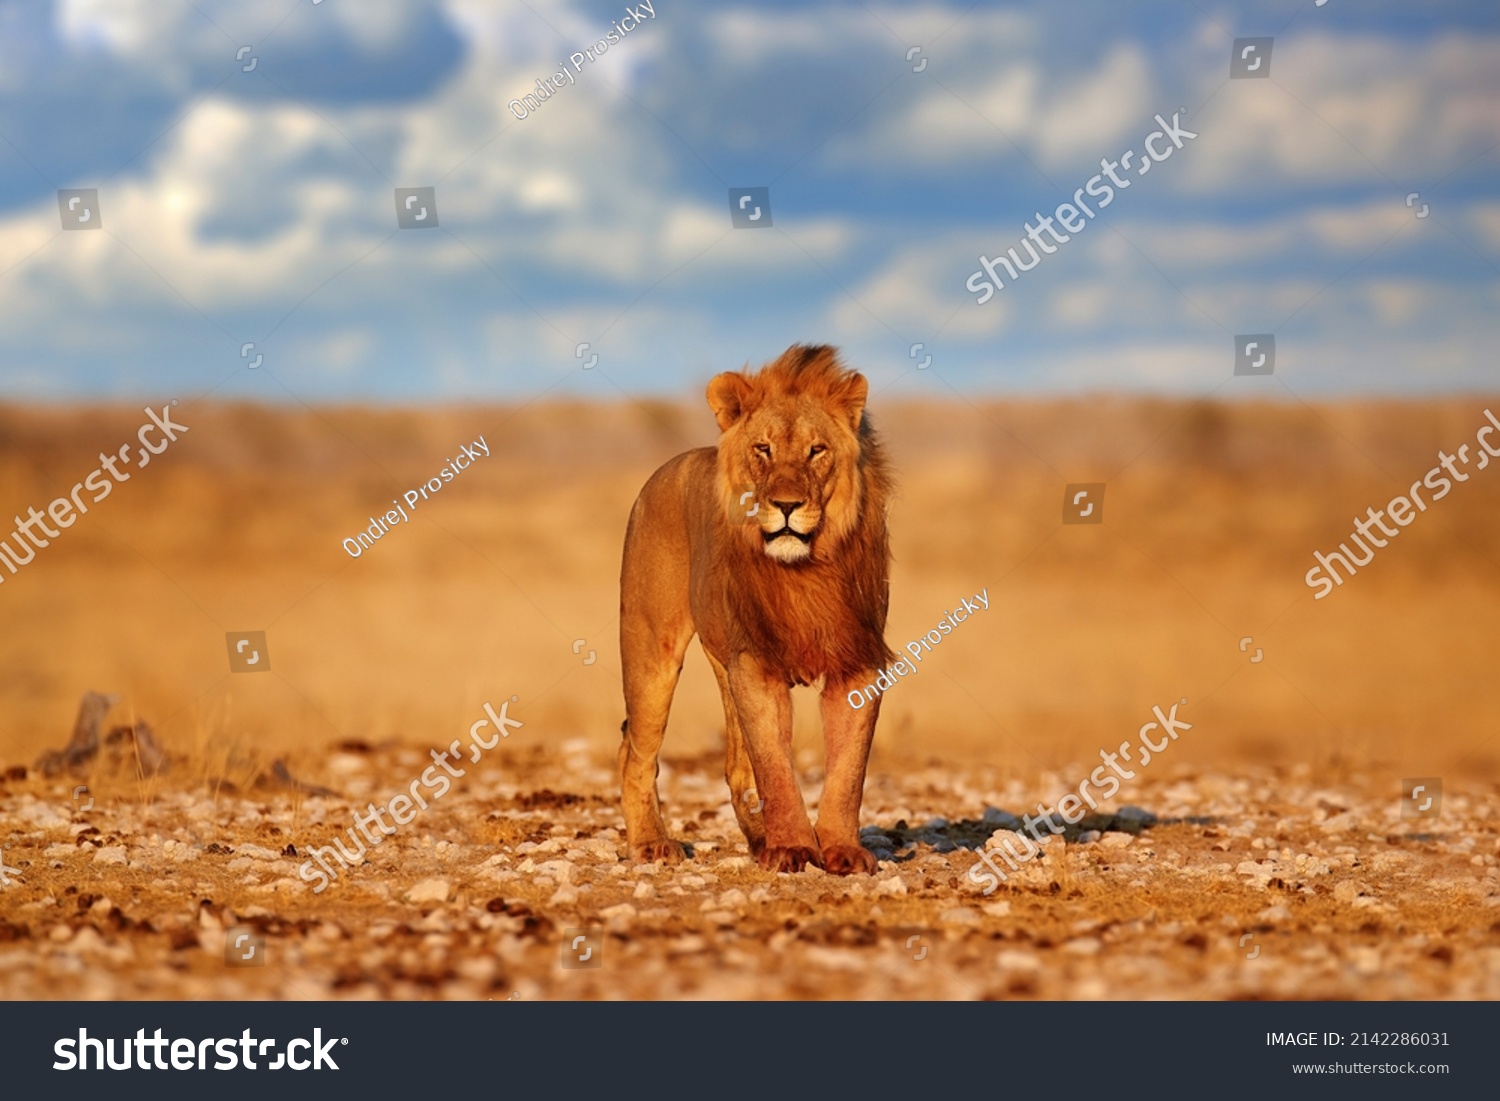 Lion with mane in Etosha, Namibia. African lion walking in the grass, with beautiful evening light. Wildlife scene from nature. Animal in the habitat. #2142286031